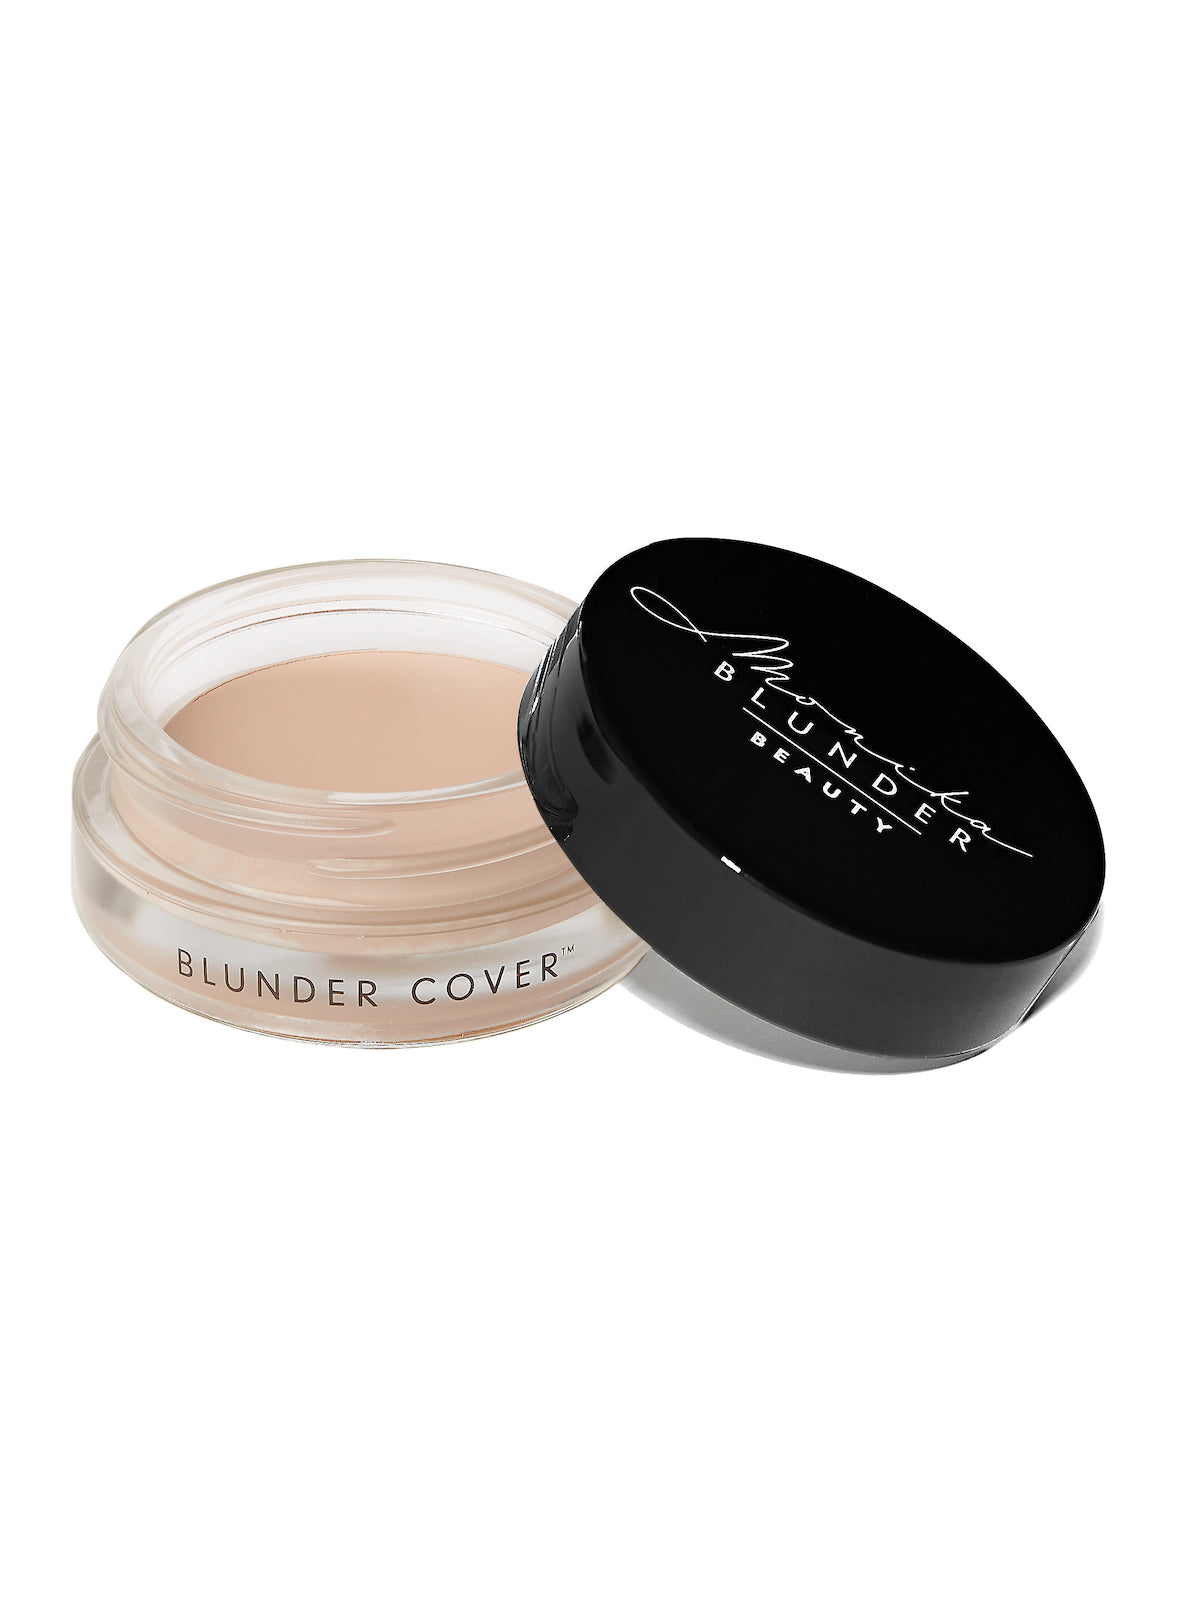 Blunder Cover an All-In-One Foundation/Concealer Shade - ZWEI.25 - 0